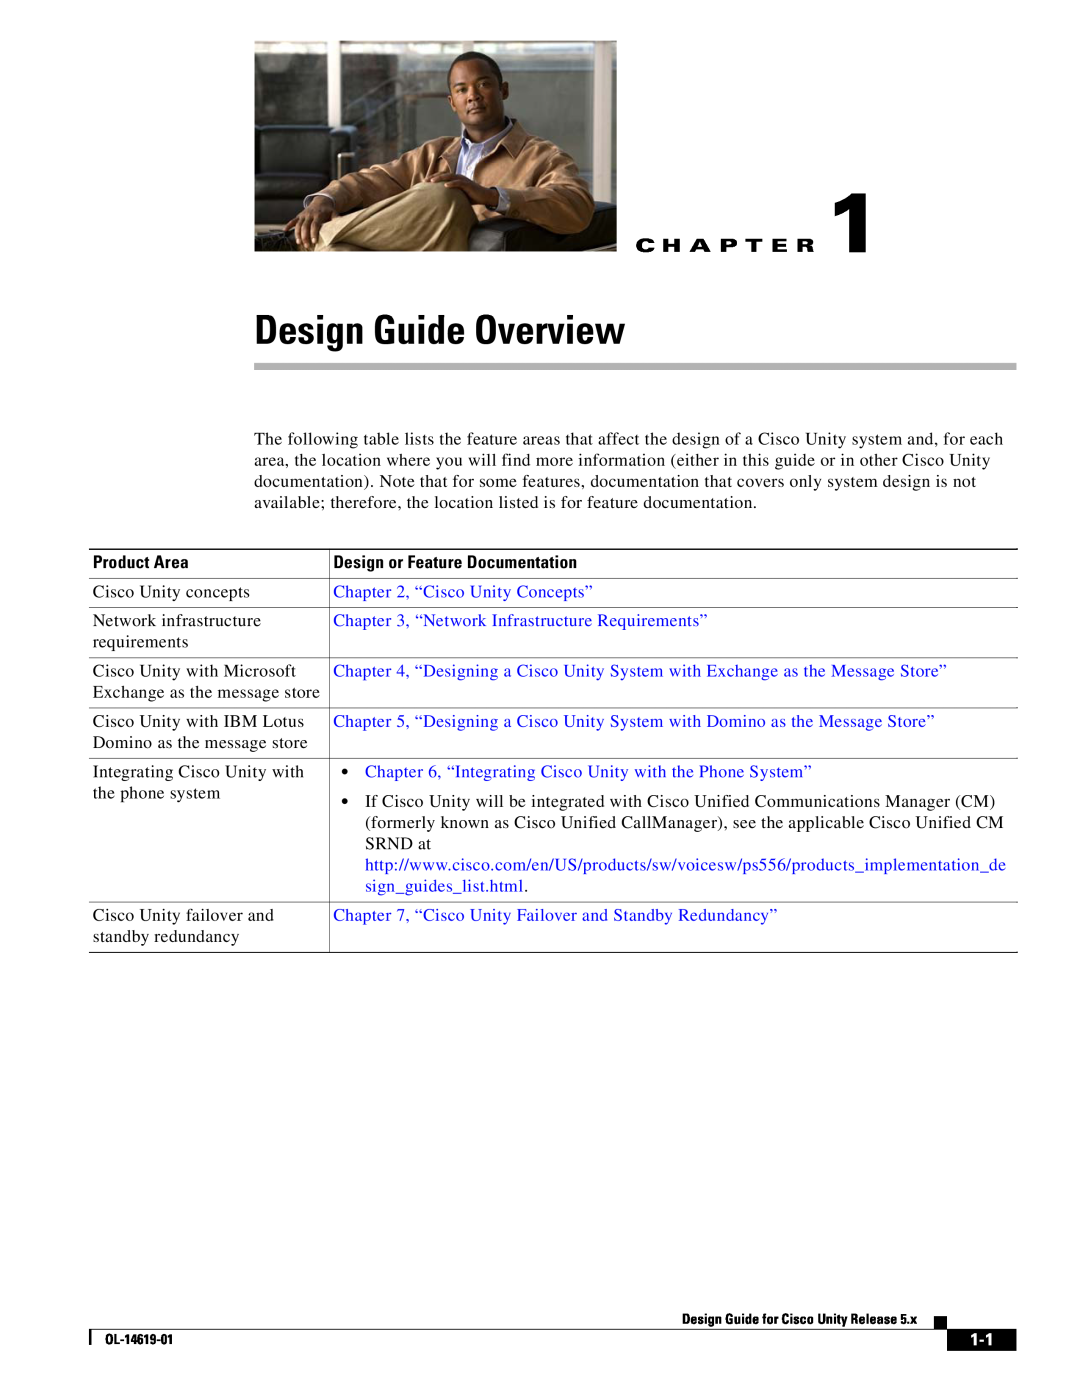 Cisco Systems OL-14619-01 manual Design Guide Overview, C H A P T E R, Product Area, Design or Feature Documentation 